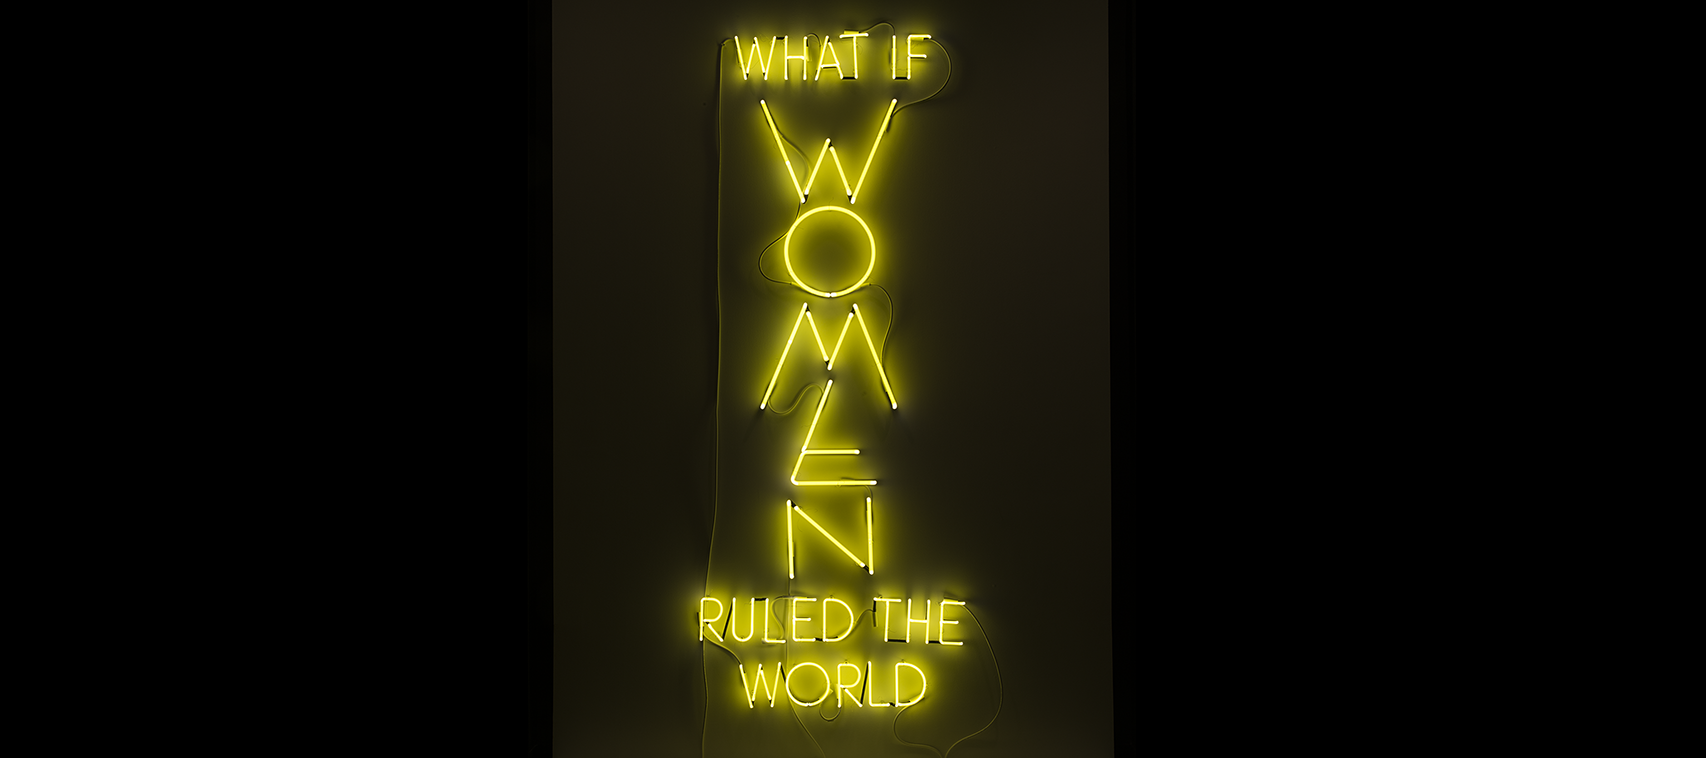 The phrase “What if Women Ruled the World” is sculpted with neon tubes of bright yellow, in all capital letters. The letters of “WOMEN” are larger than the rest and are configured vertically.